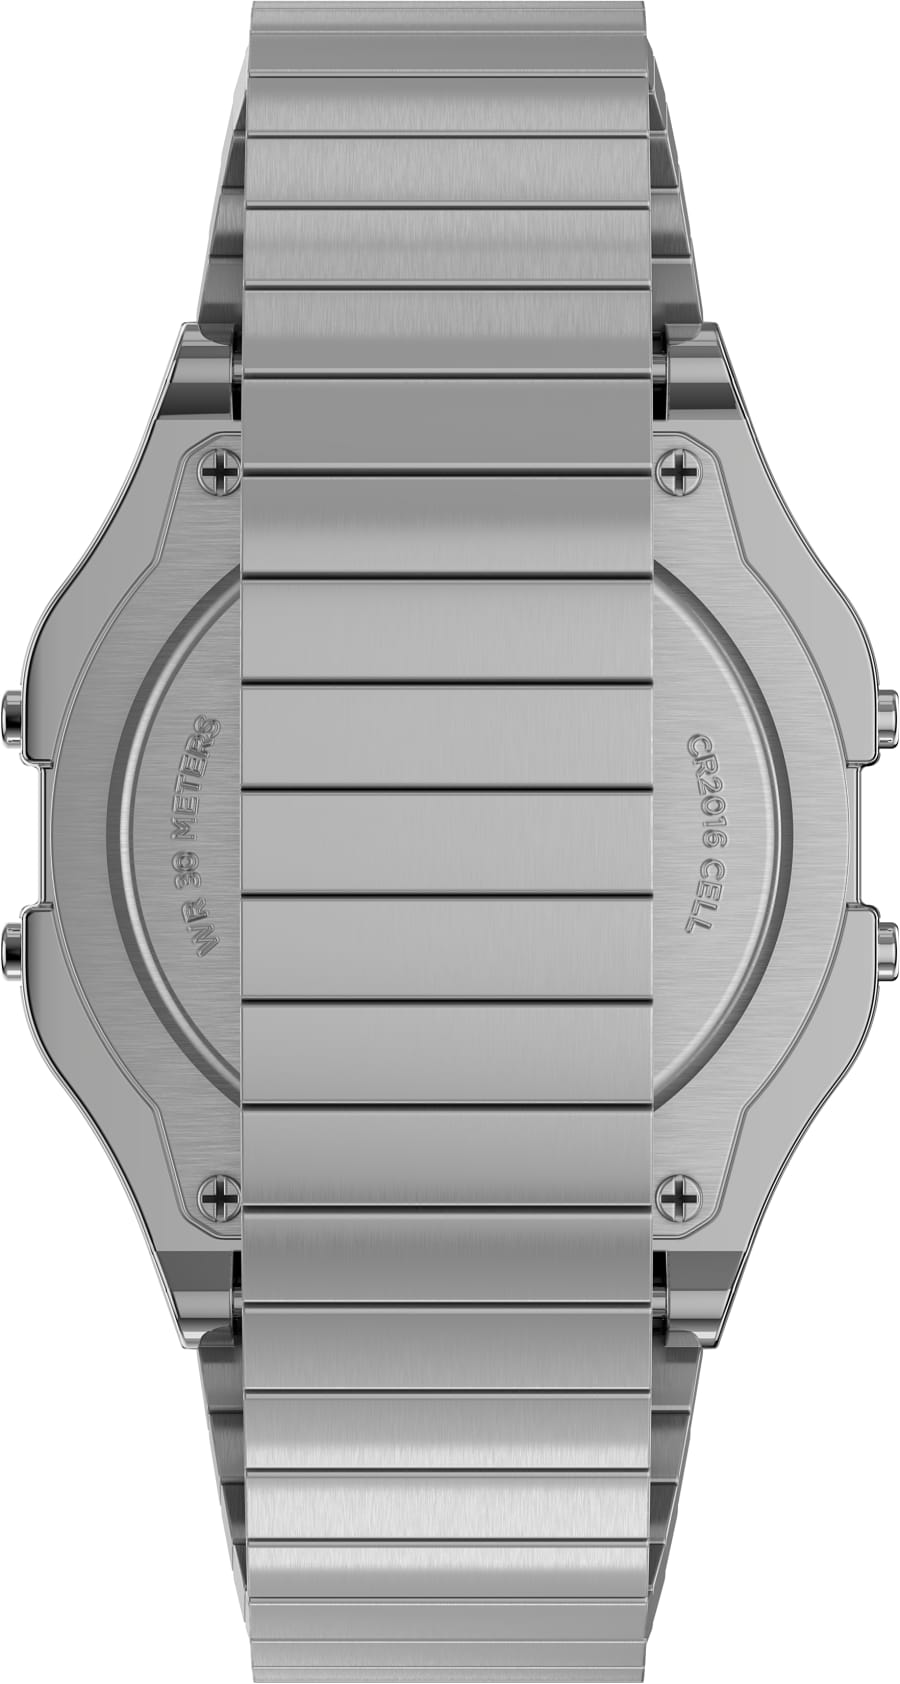 Timex T80 Expansion - Silver